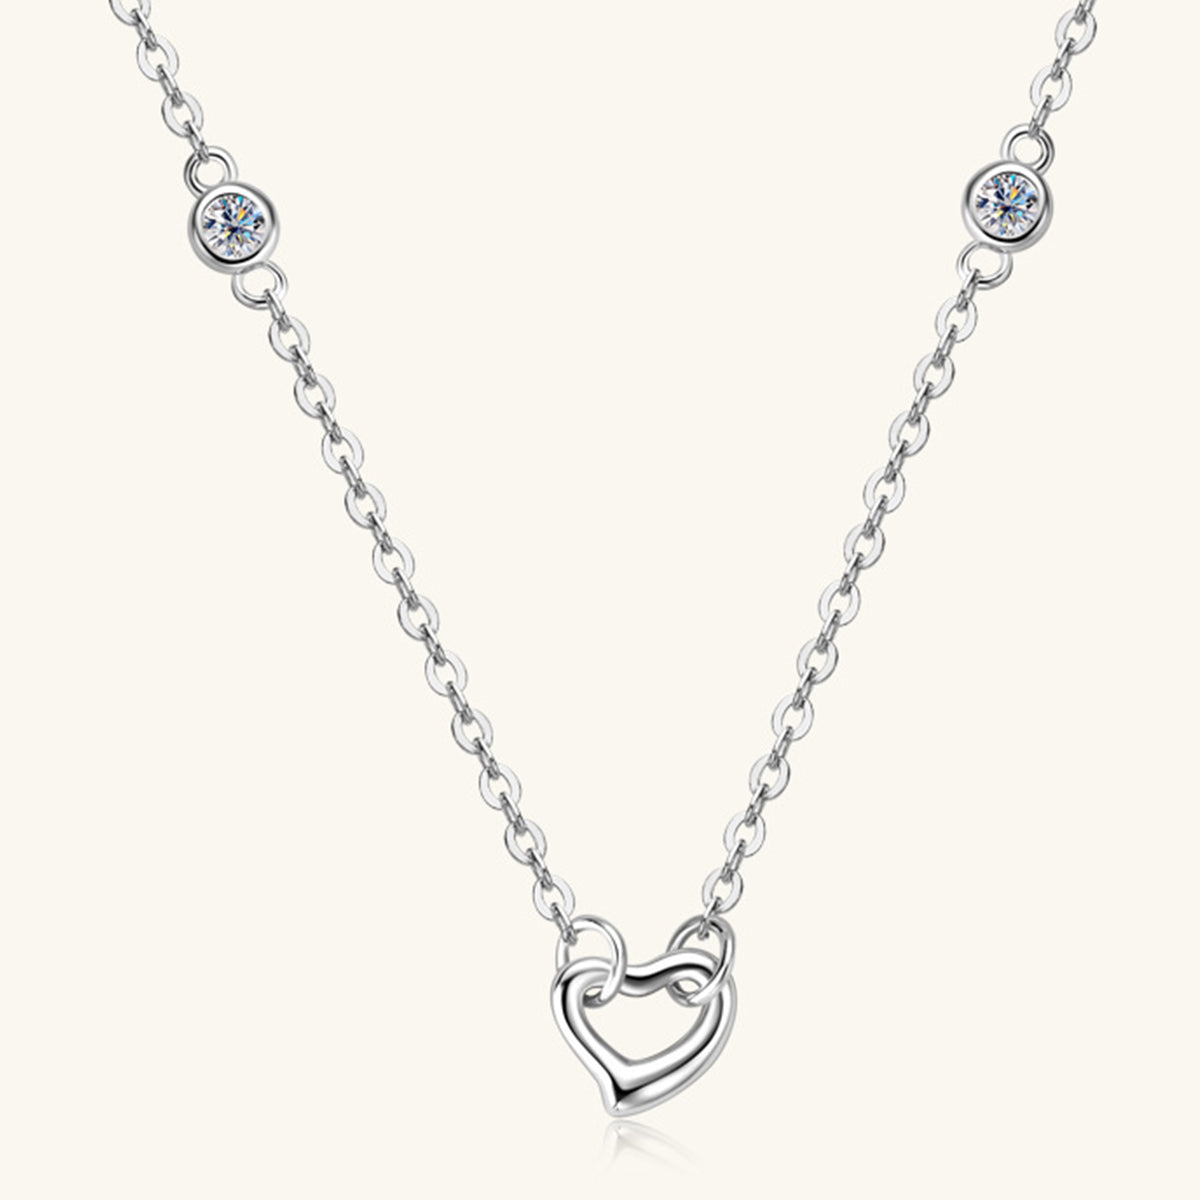 Seashell Moissanite 925 Sterling Silver Heart Necklace Sentient Beauty Fashions necklaces